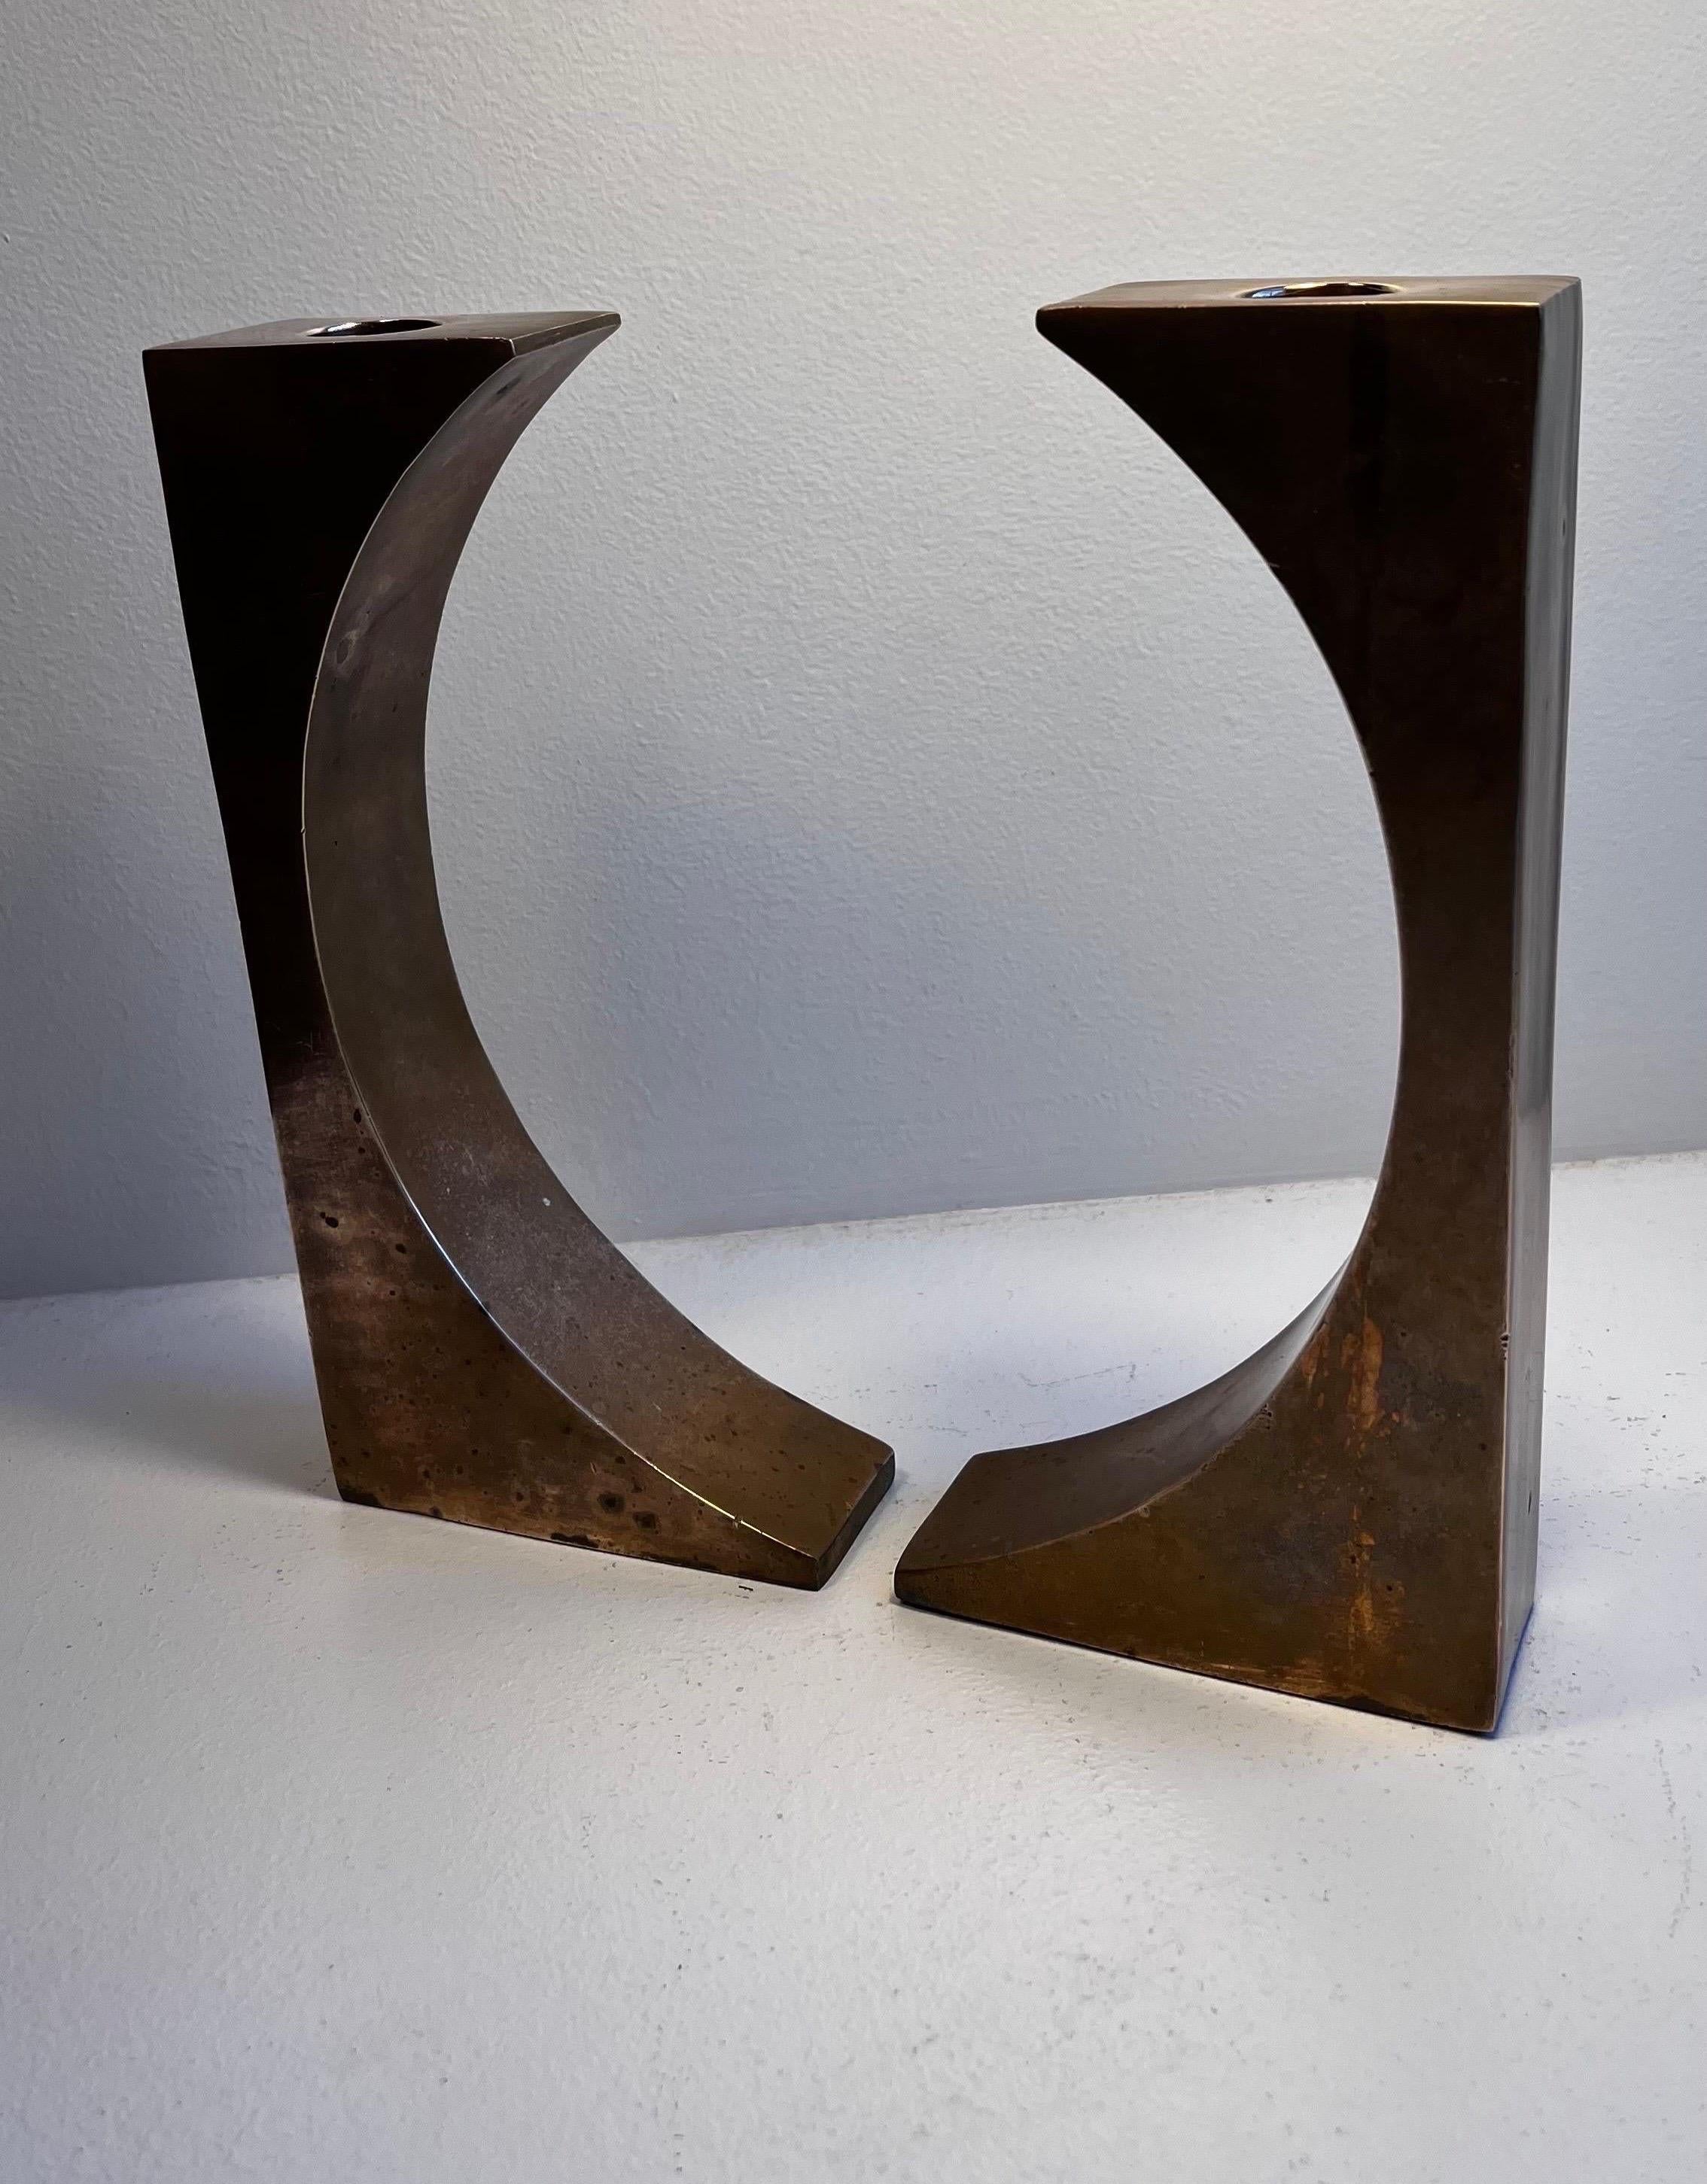 Cast Pair of  Bronze Candlesticks or Bookends in the style M. Gerber, c 1970